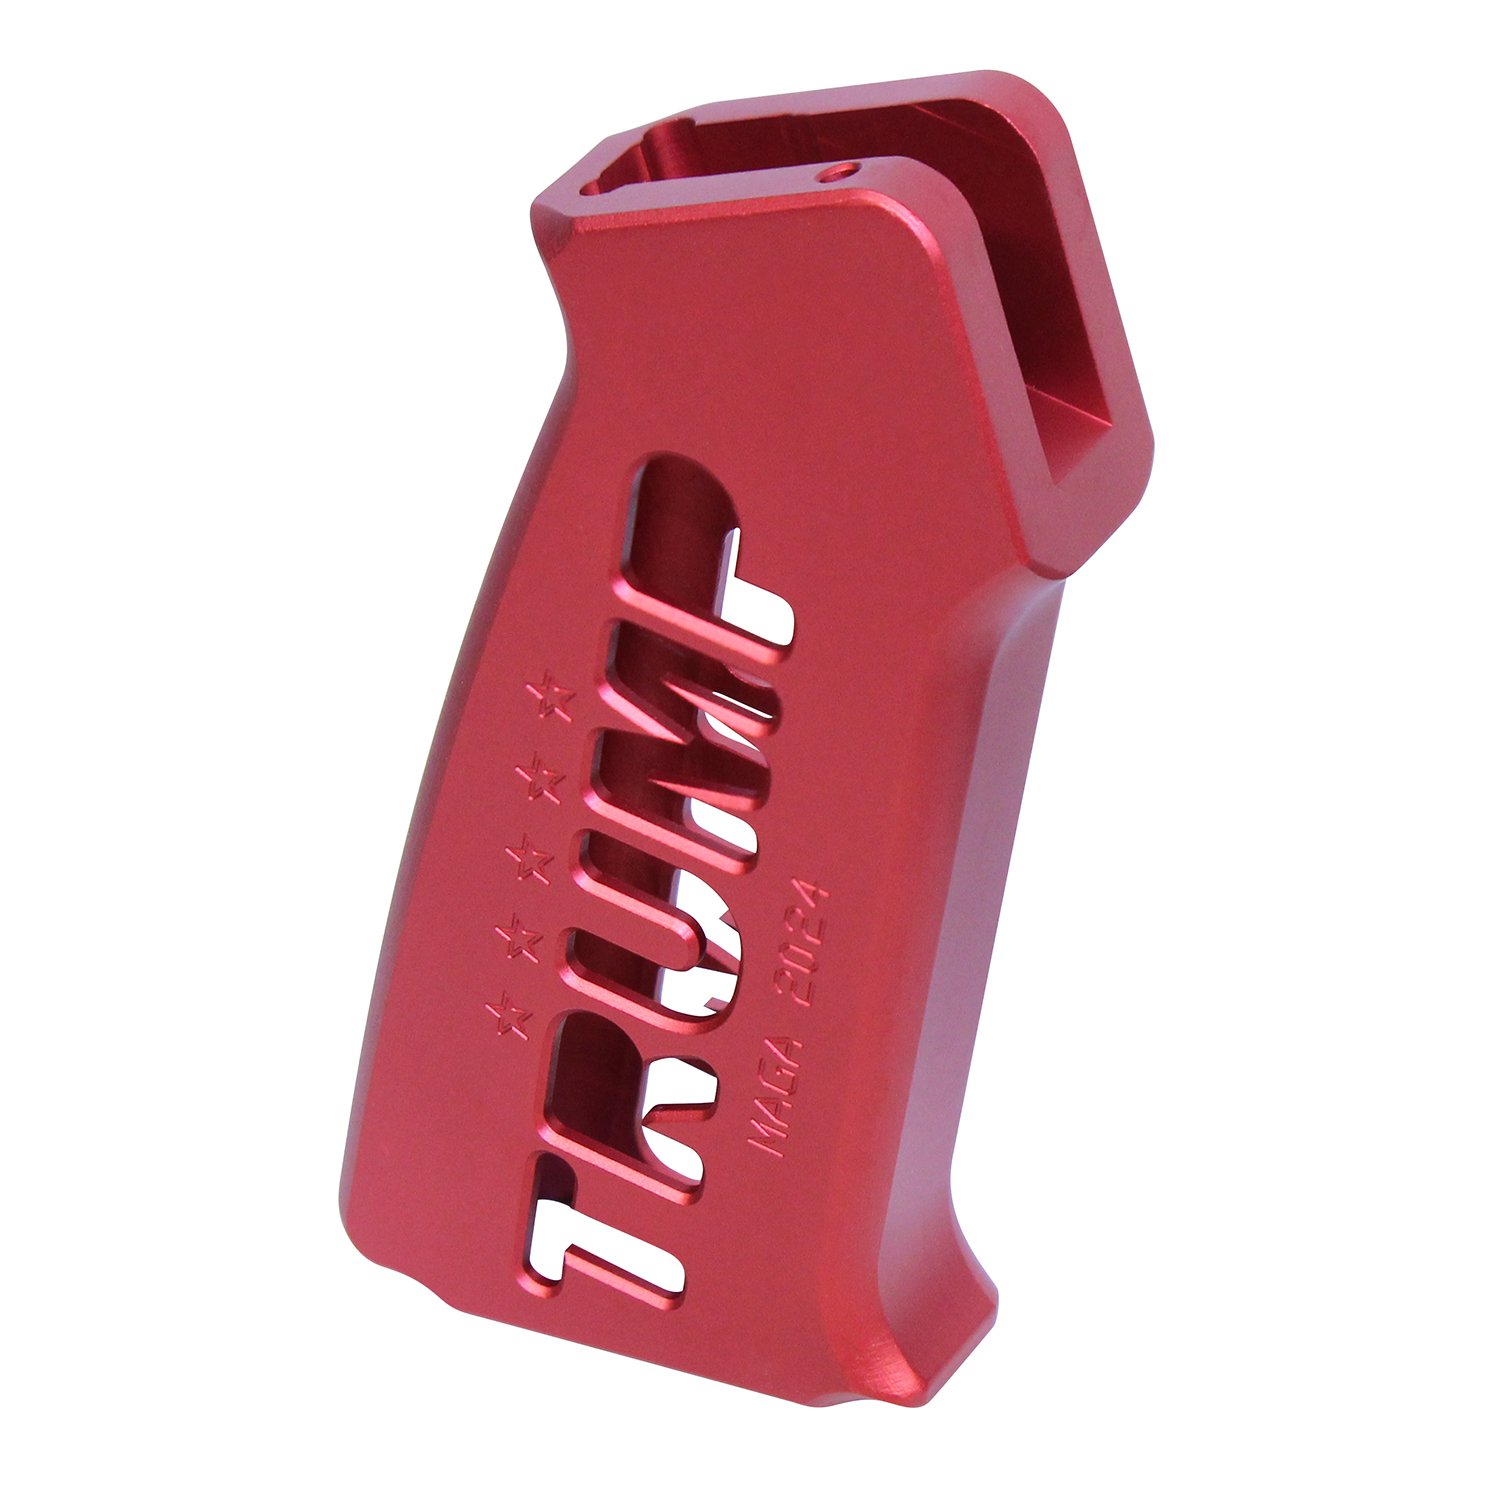 AR-15 "Trump Series" Limited Edition Pistol Grip in Anodized Red